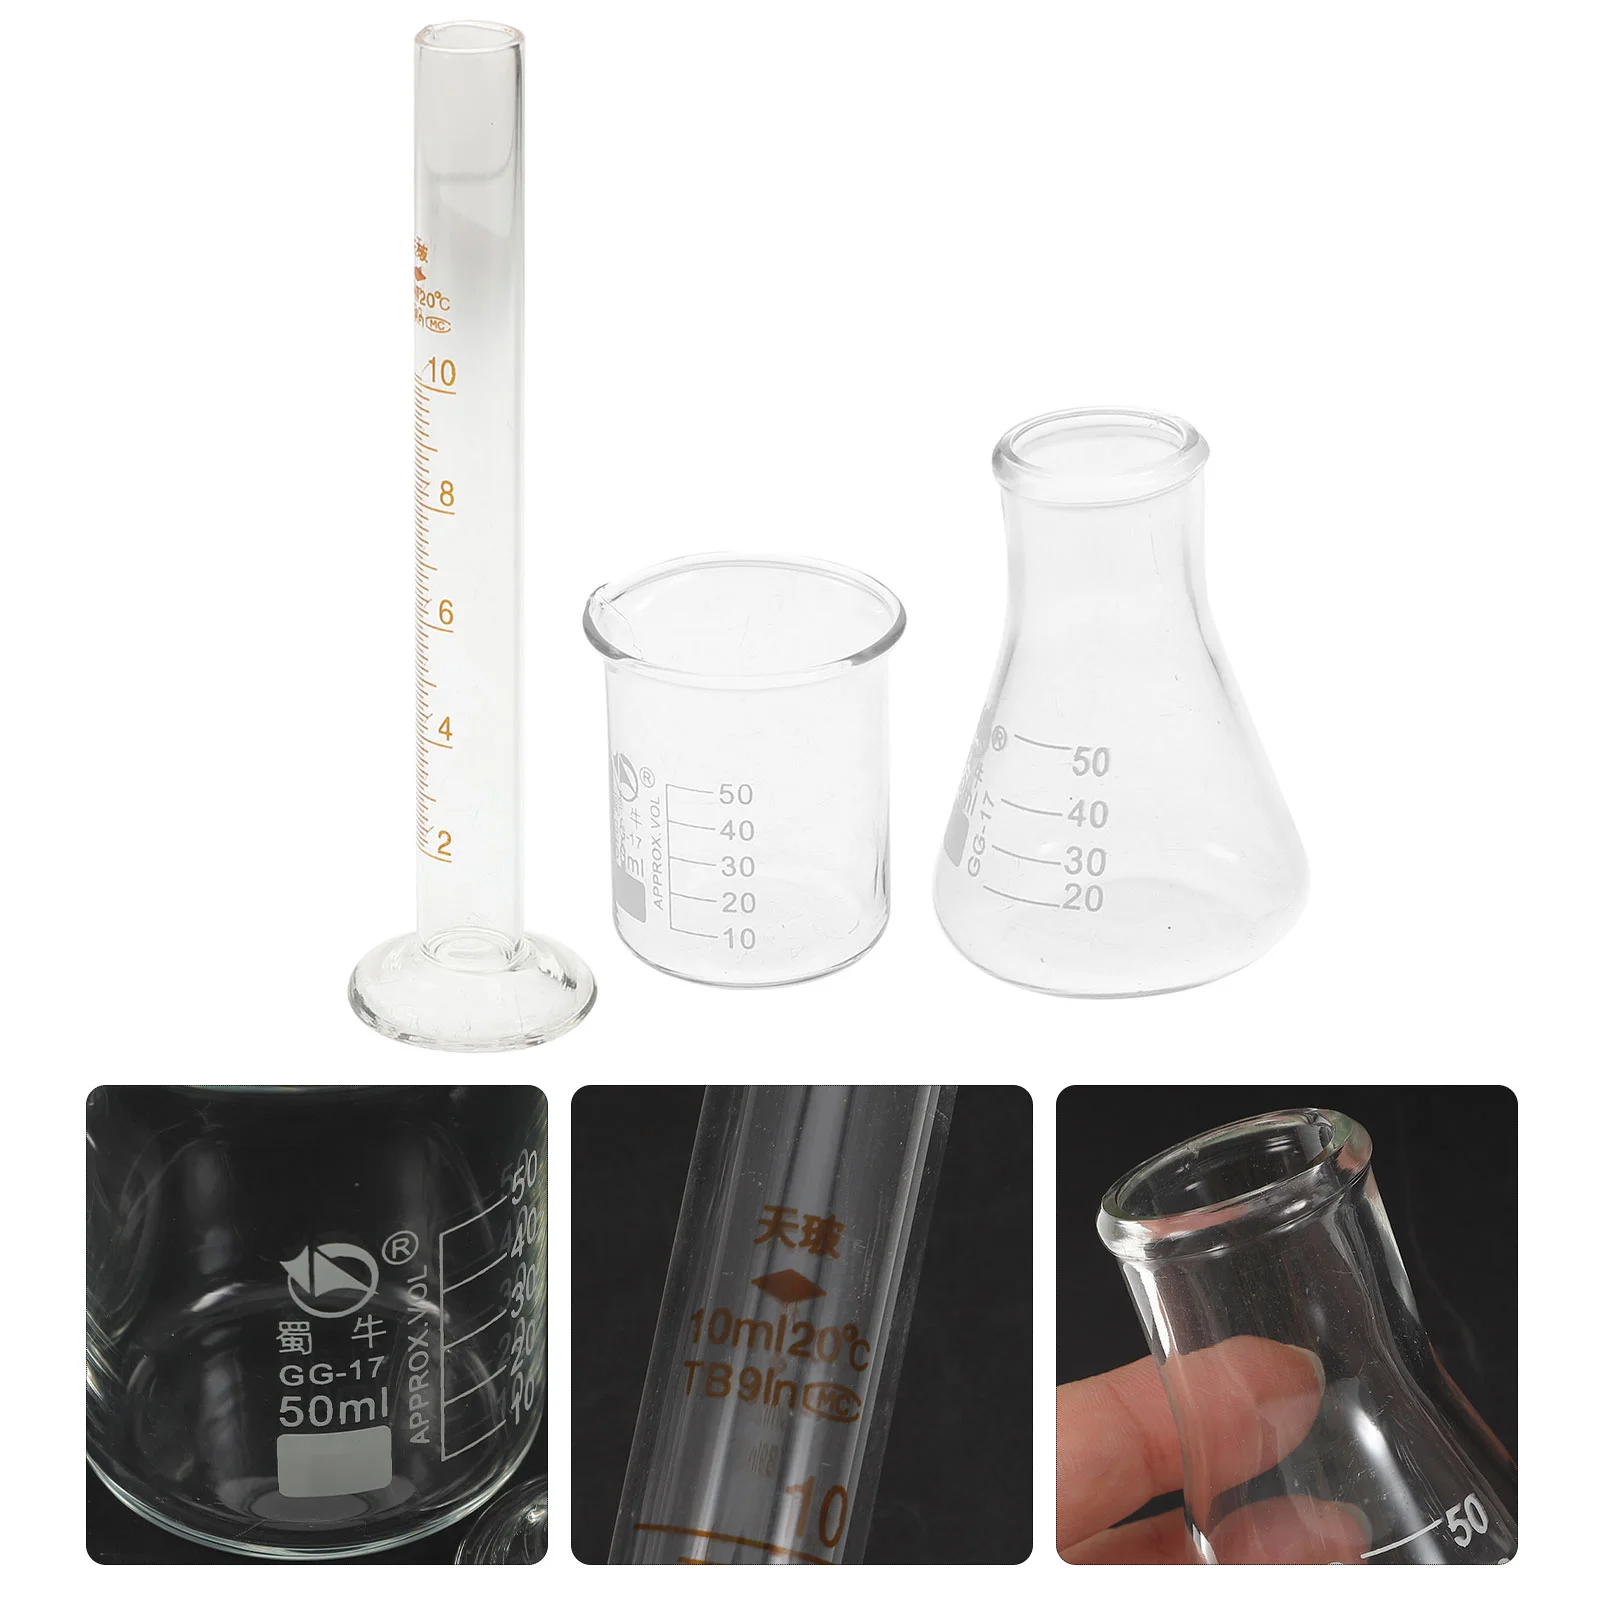 

3 Pcs Experiment Kit Graduated Measuring Cup Glass Containers for Liquids Laboratory Beaker Conical Flask Cylinder Aldult